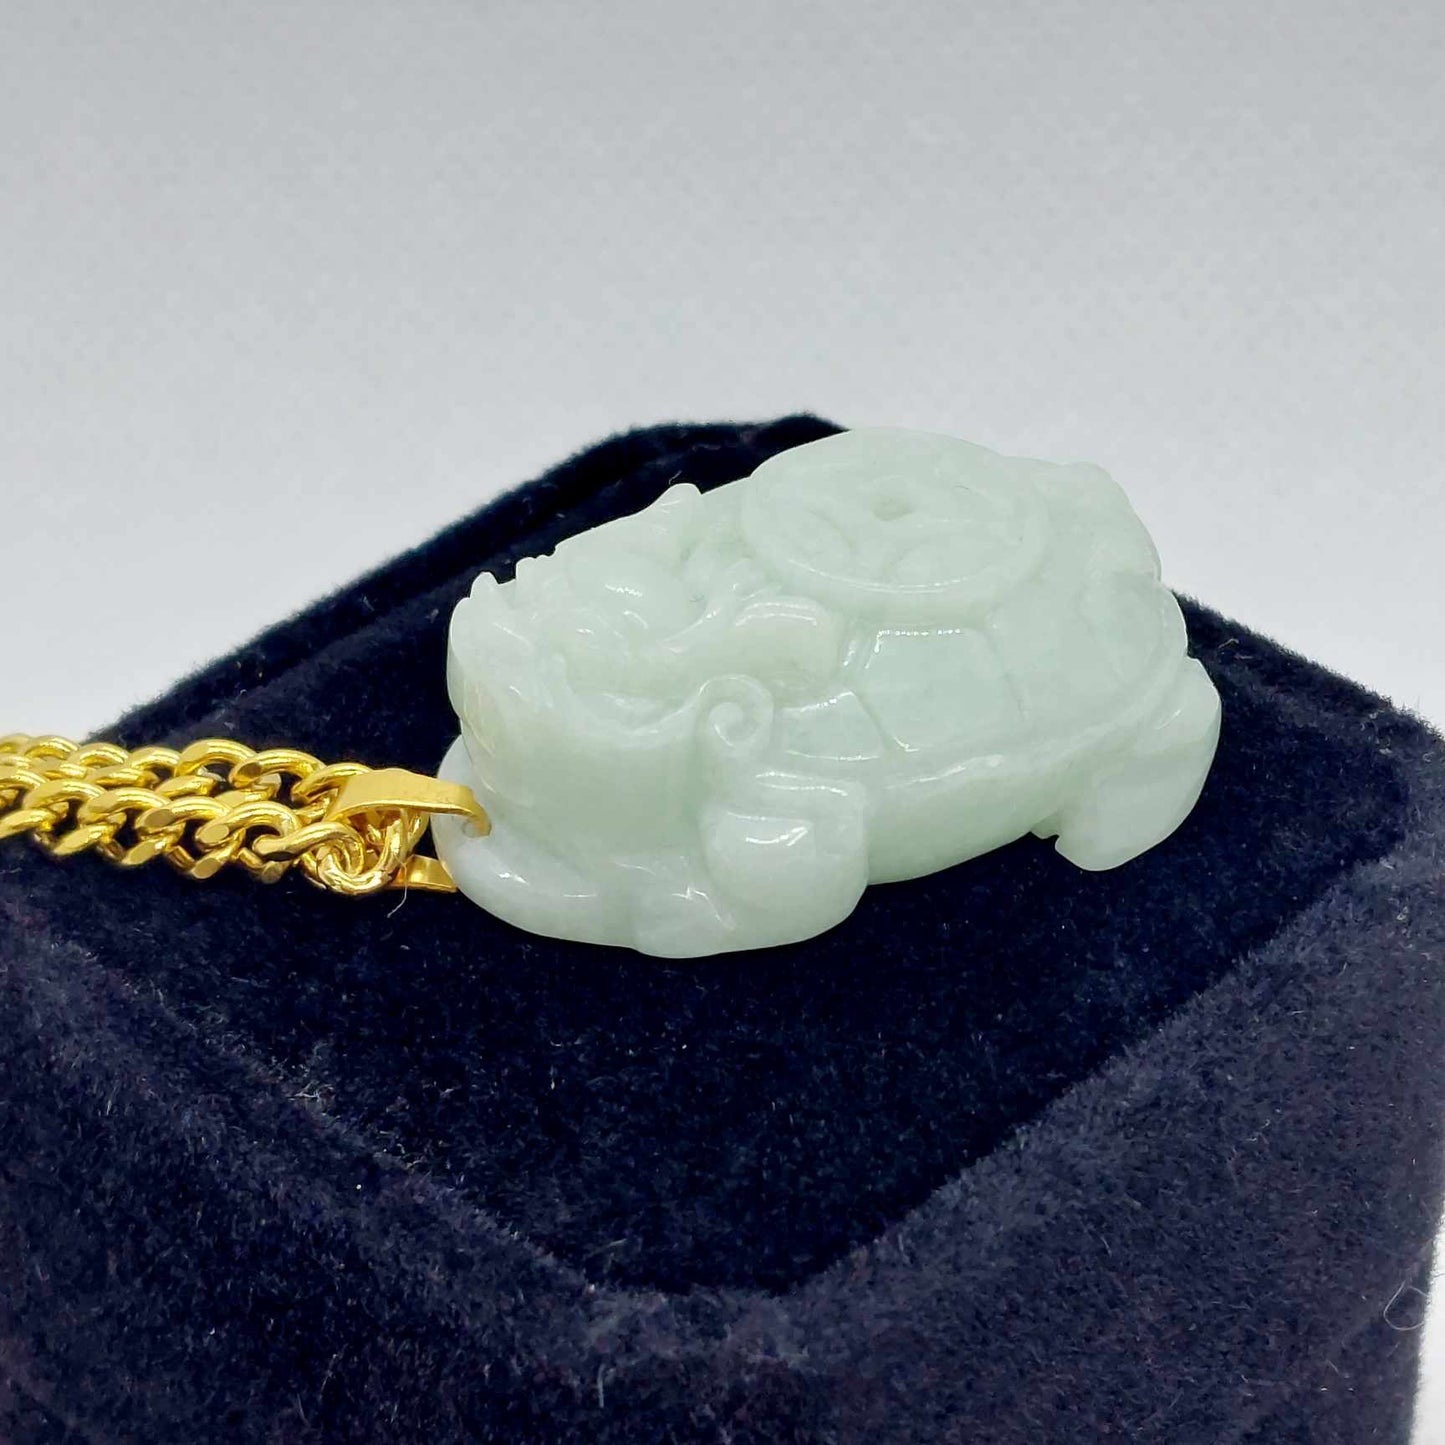 Natural Burmese Jade Dragon Turtle Pendant with Gold Plated Stainless Steel Chain Necklace